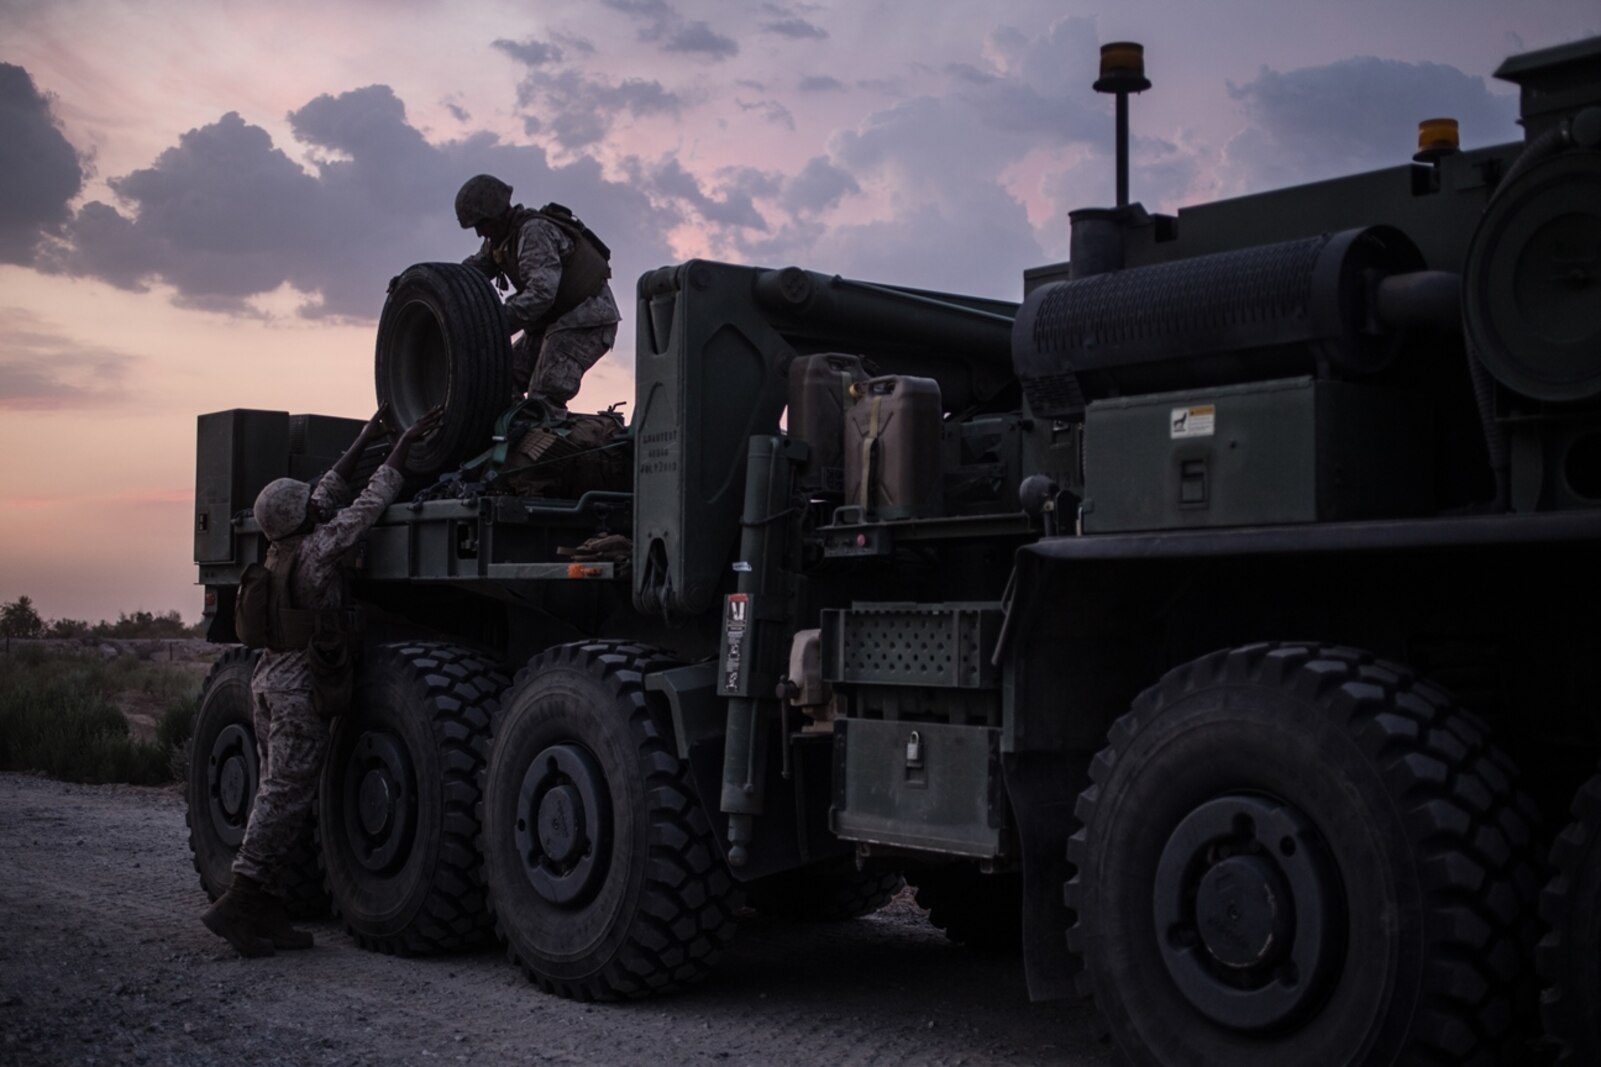 U.S. Marines with Bridge Company, 7th Engineer Support Battalion, 1st Marine Logistics Group, prepare to secure extra concertina wire on a Logistics Vehicle System Replacement truck during Exercise Deep Strike II at Blythe, Calif., September 6, 2017. Logistics Vehicle System Replacement trucks are one of various different vehicles used to transport large amounts of supplies or other vehicles that attribute to the logistical capabilities of the MLG. (U.S. Marine Corps photo by Lance Cpl. Timothy Shoemaker)